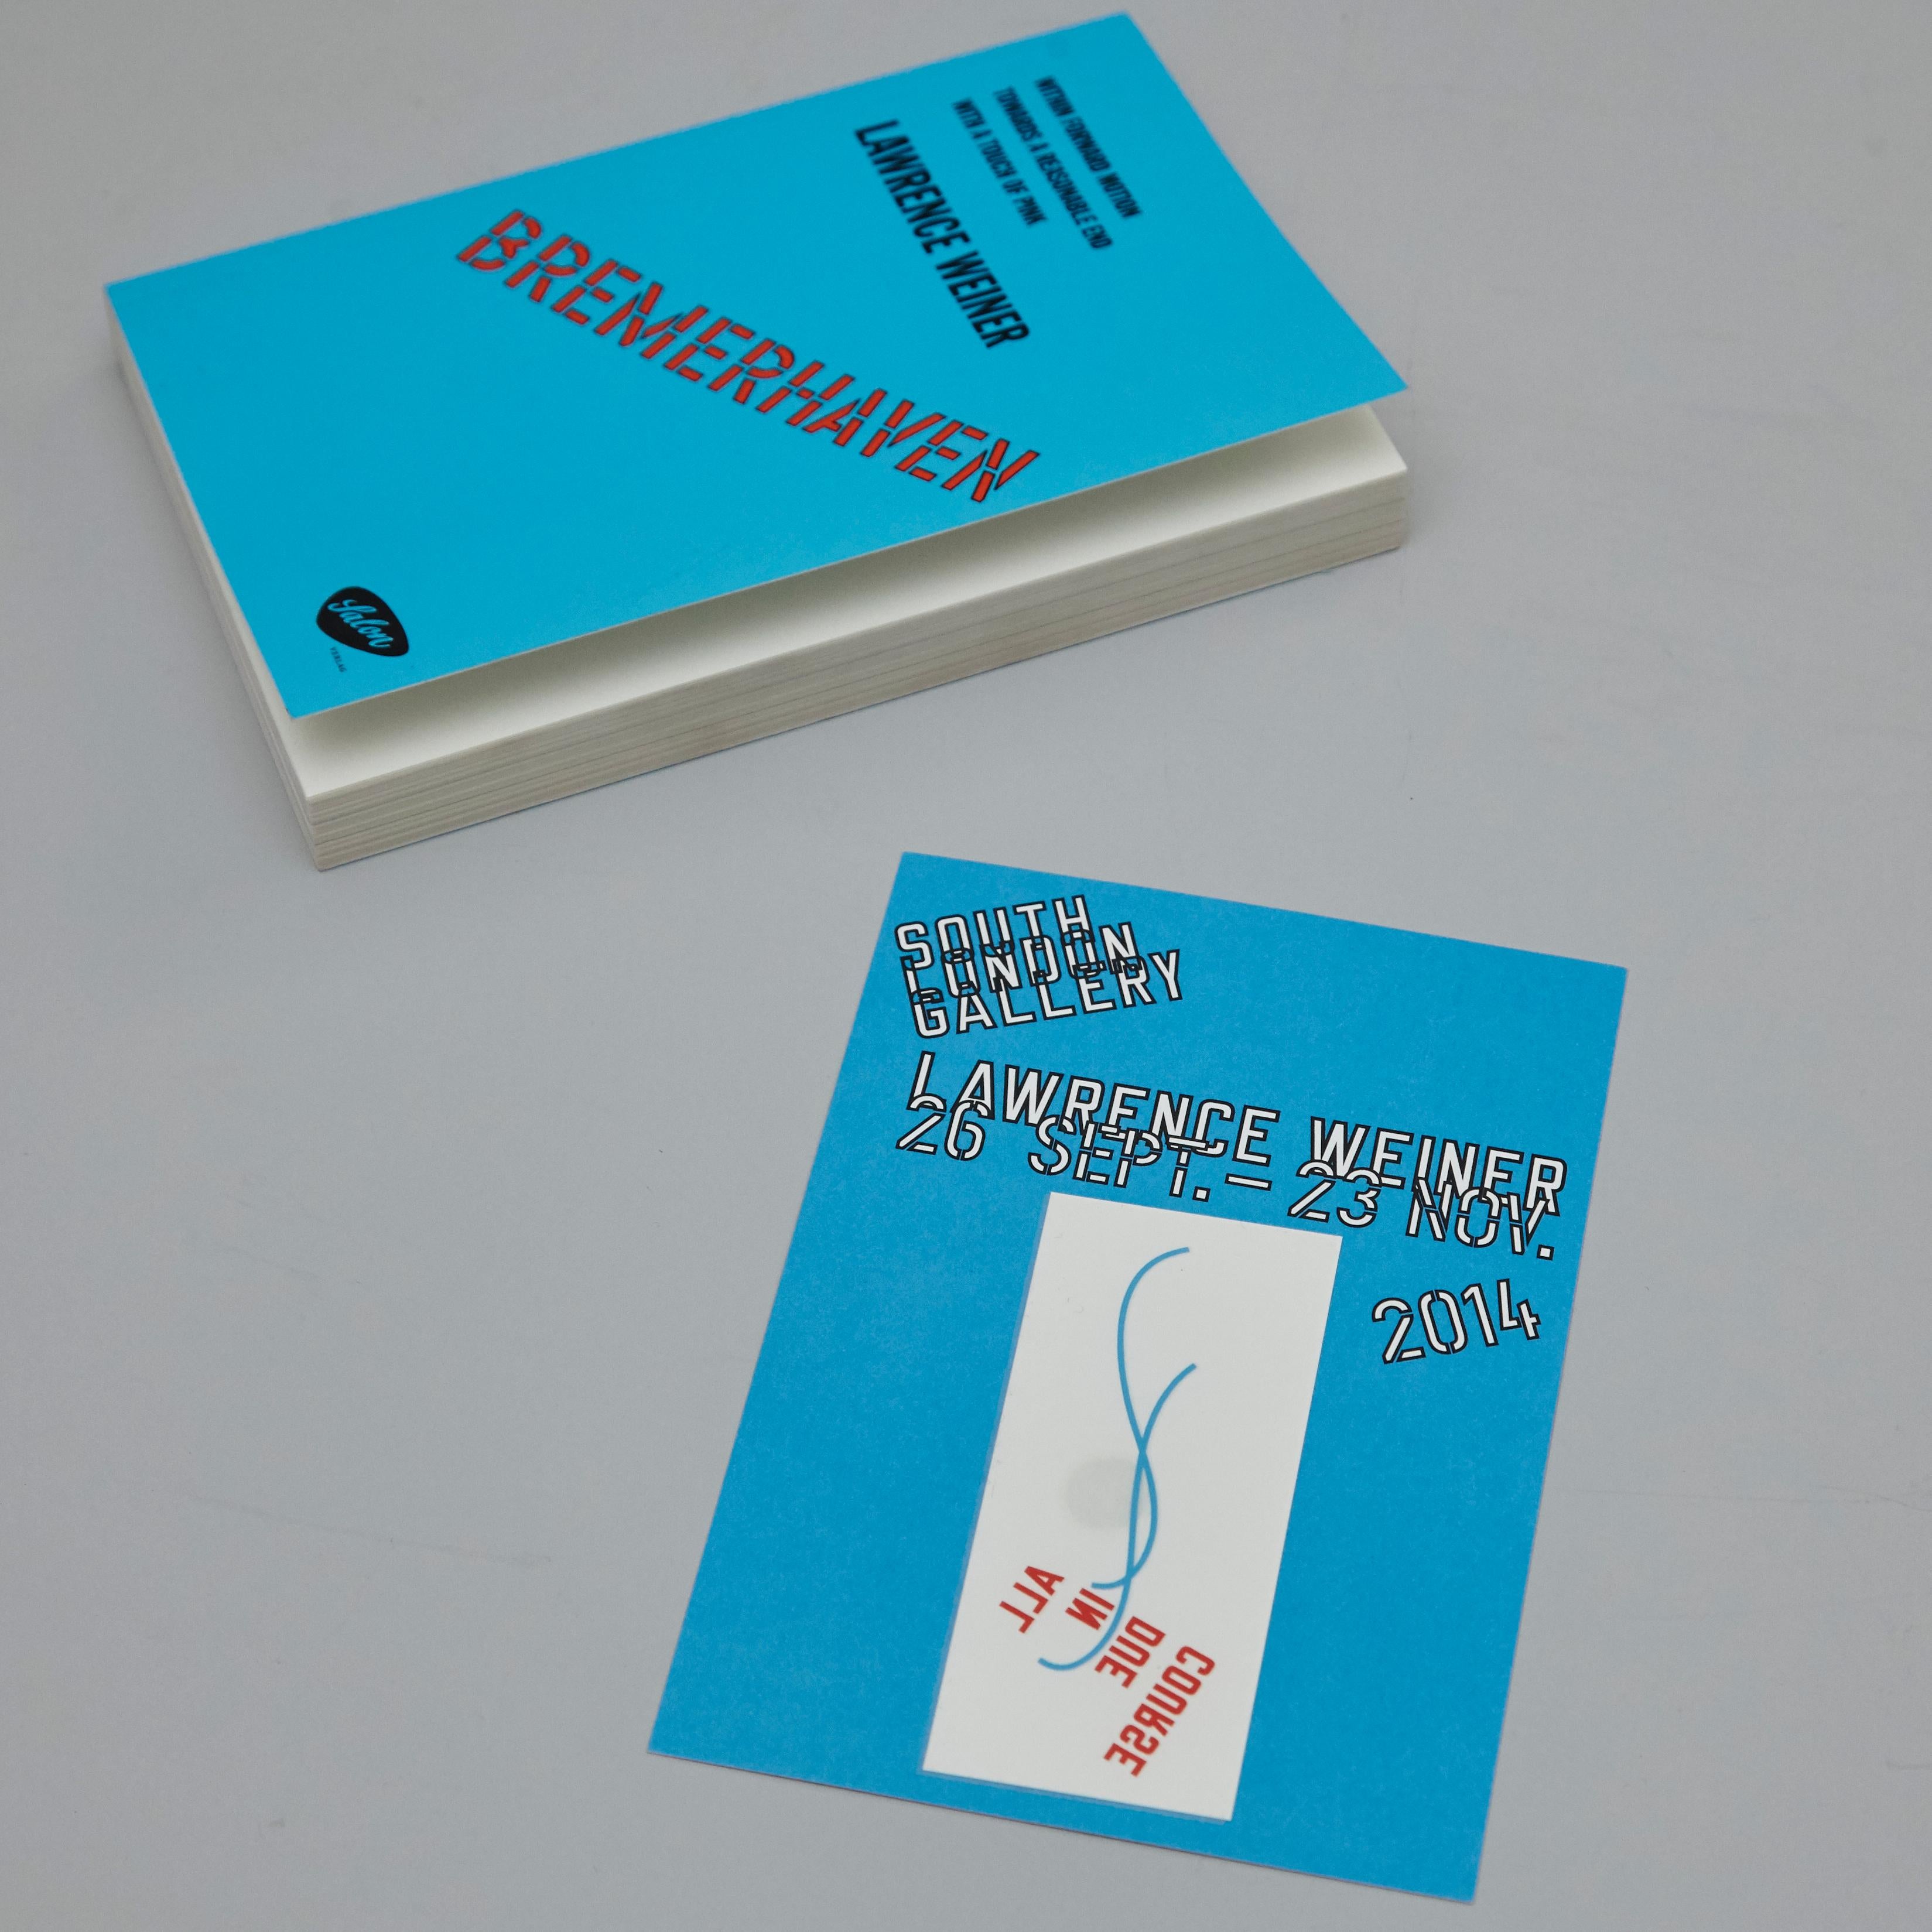 Lawrence Weiner Limited Edition Book and Tattoo, South London Gallery, 2014 For Sale 1